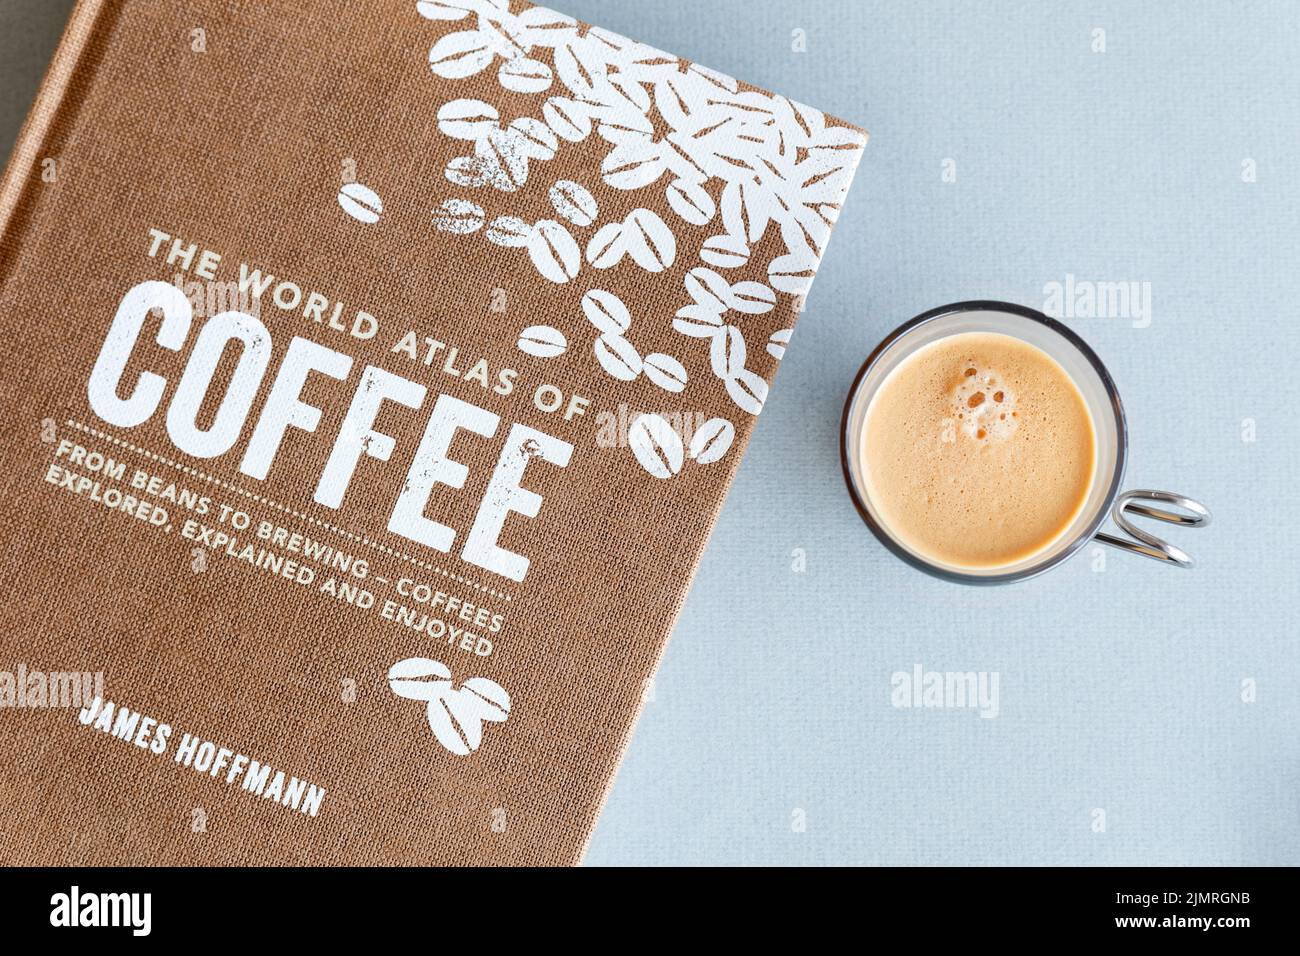 A book dedicated to coffee and coffee making called The World Atlas of Coffee written by James Hoffmann. An espresso coffee sits beside the book Stock Photo